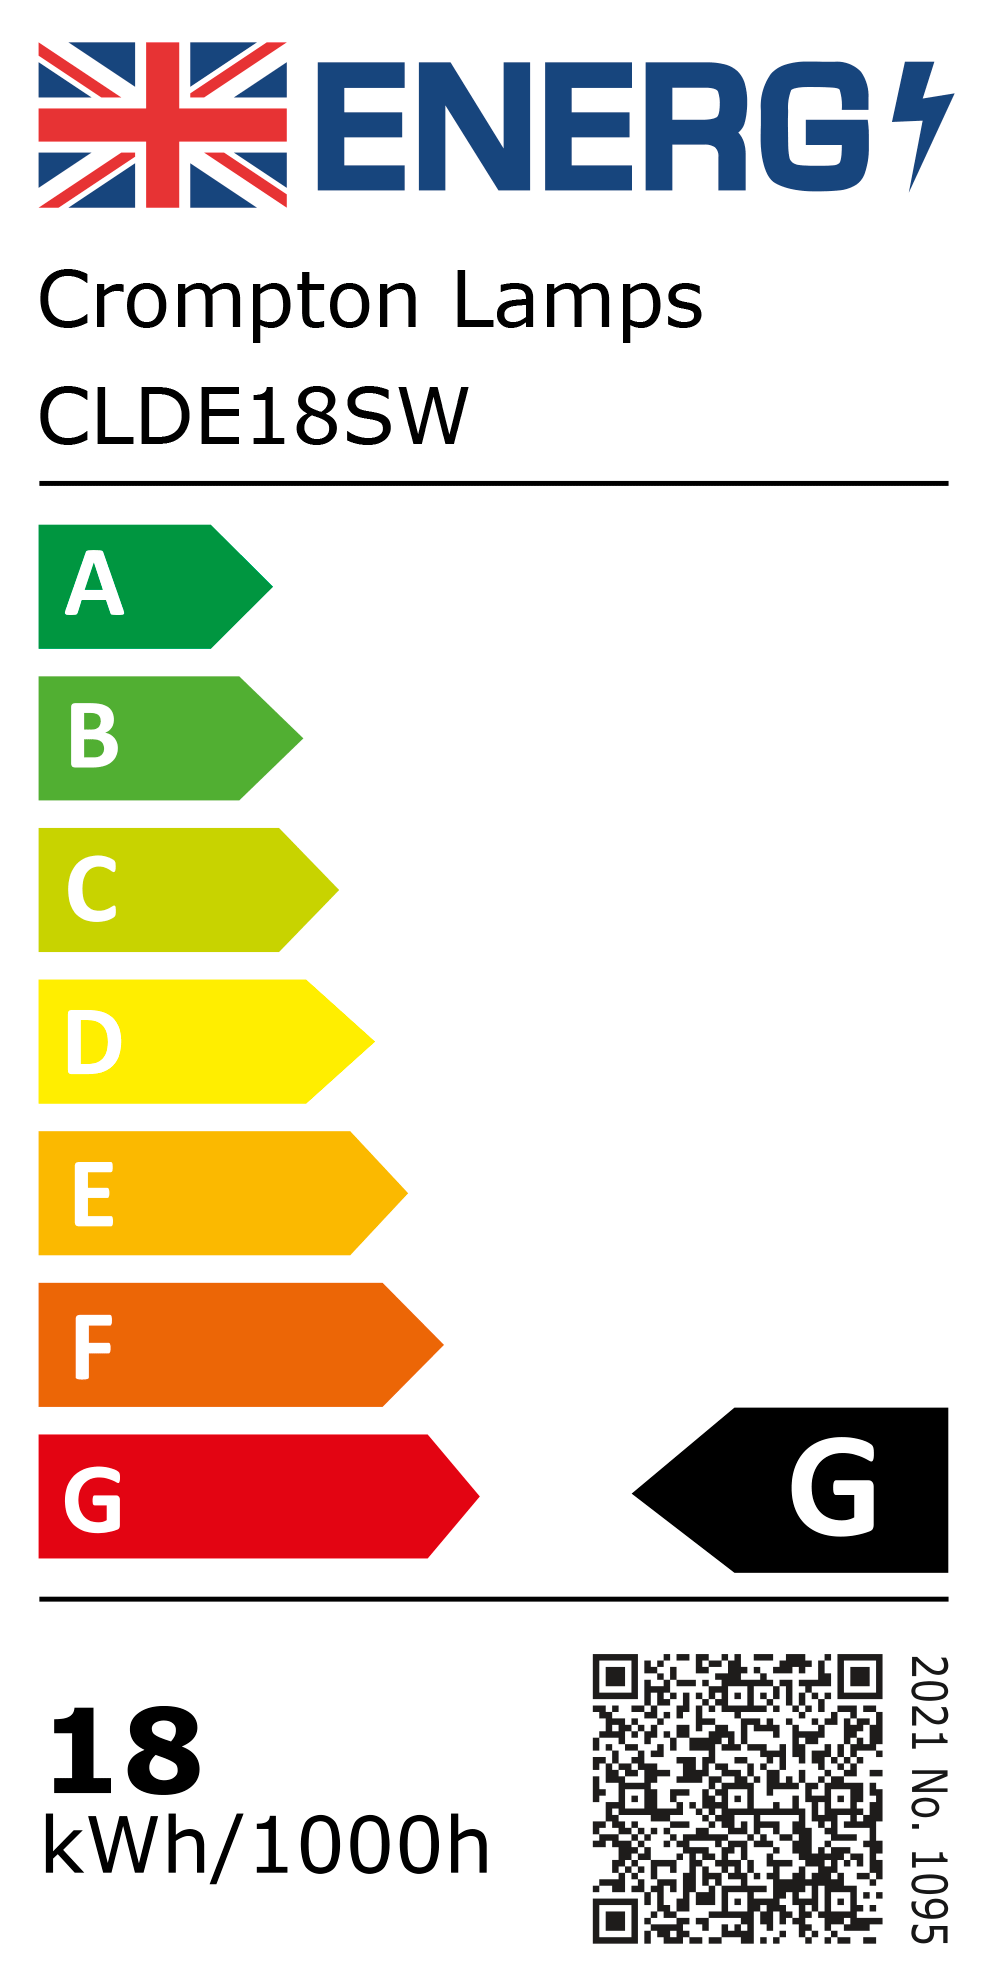 New 2021 Energy Rating Label: Stock Code CLDE18SW